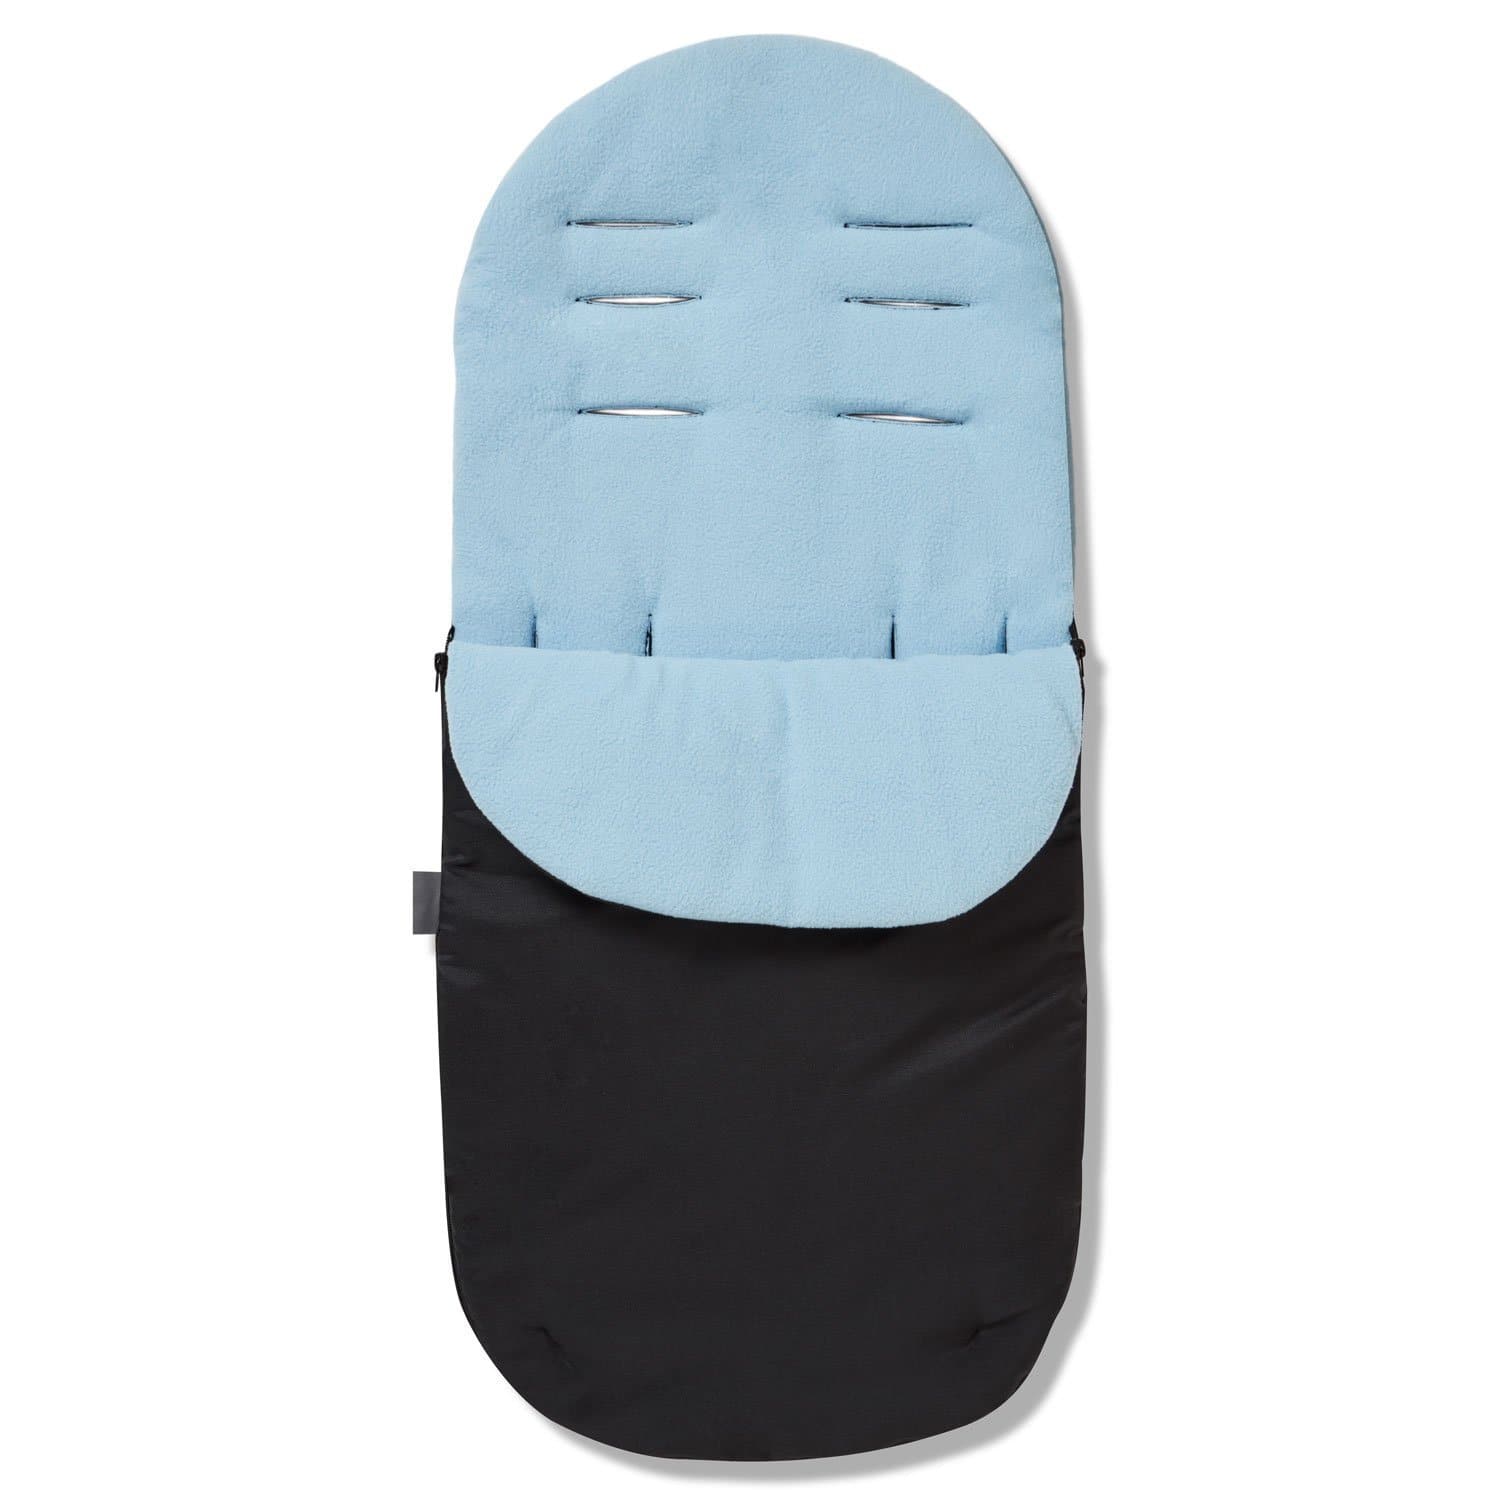 Footmuff / Cosy Toes Compatible with Kinderkraft - Light Blue / Fits All Models | For Your Little One